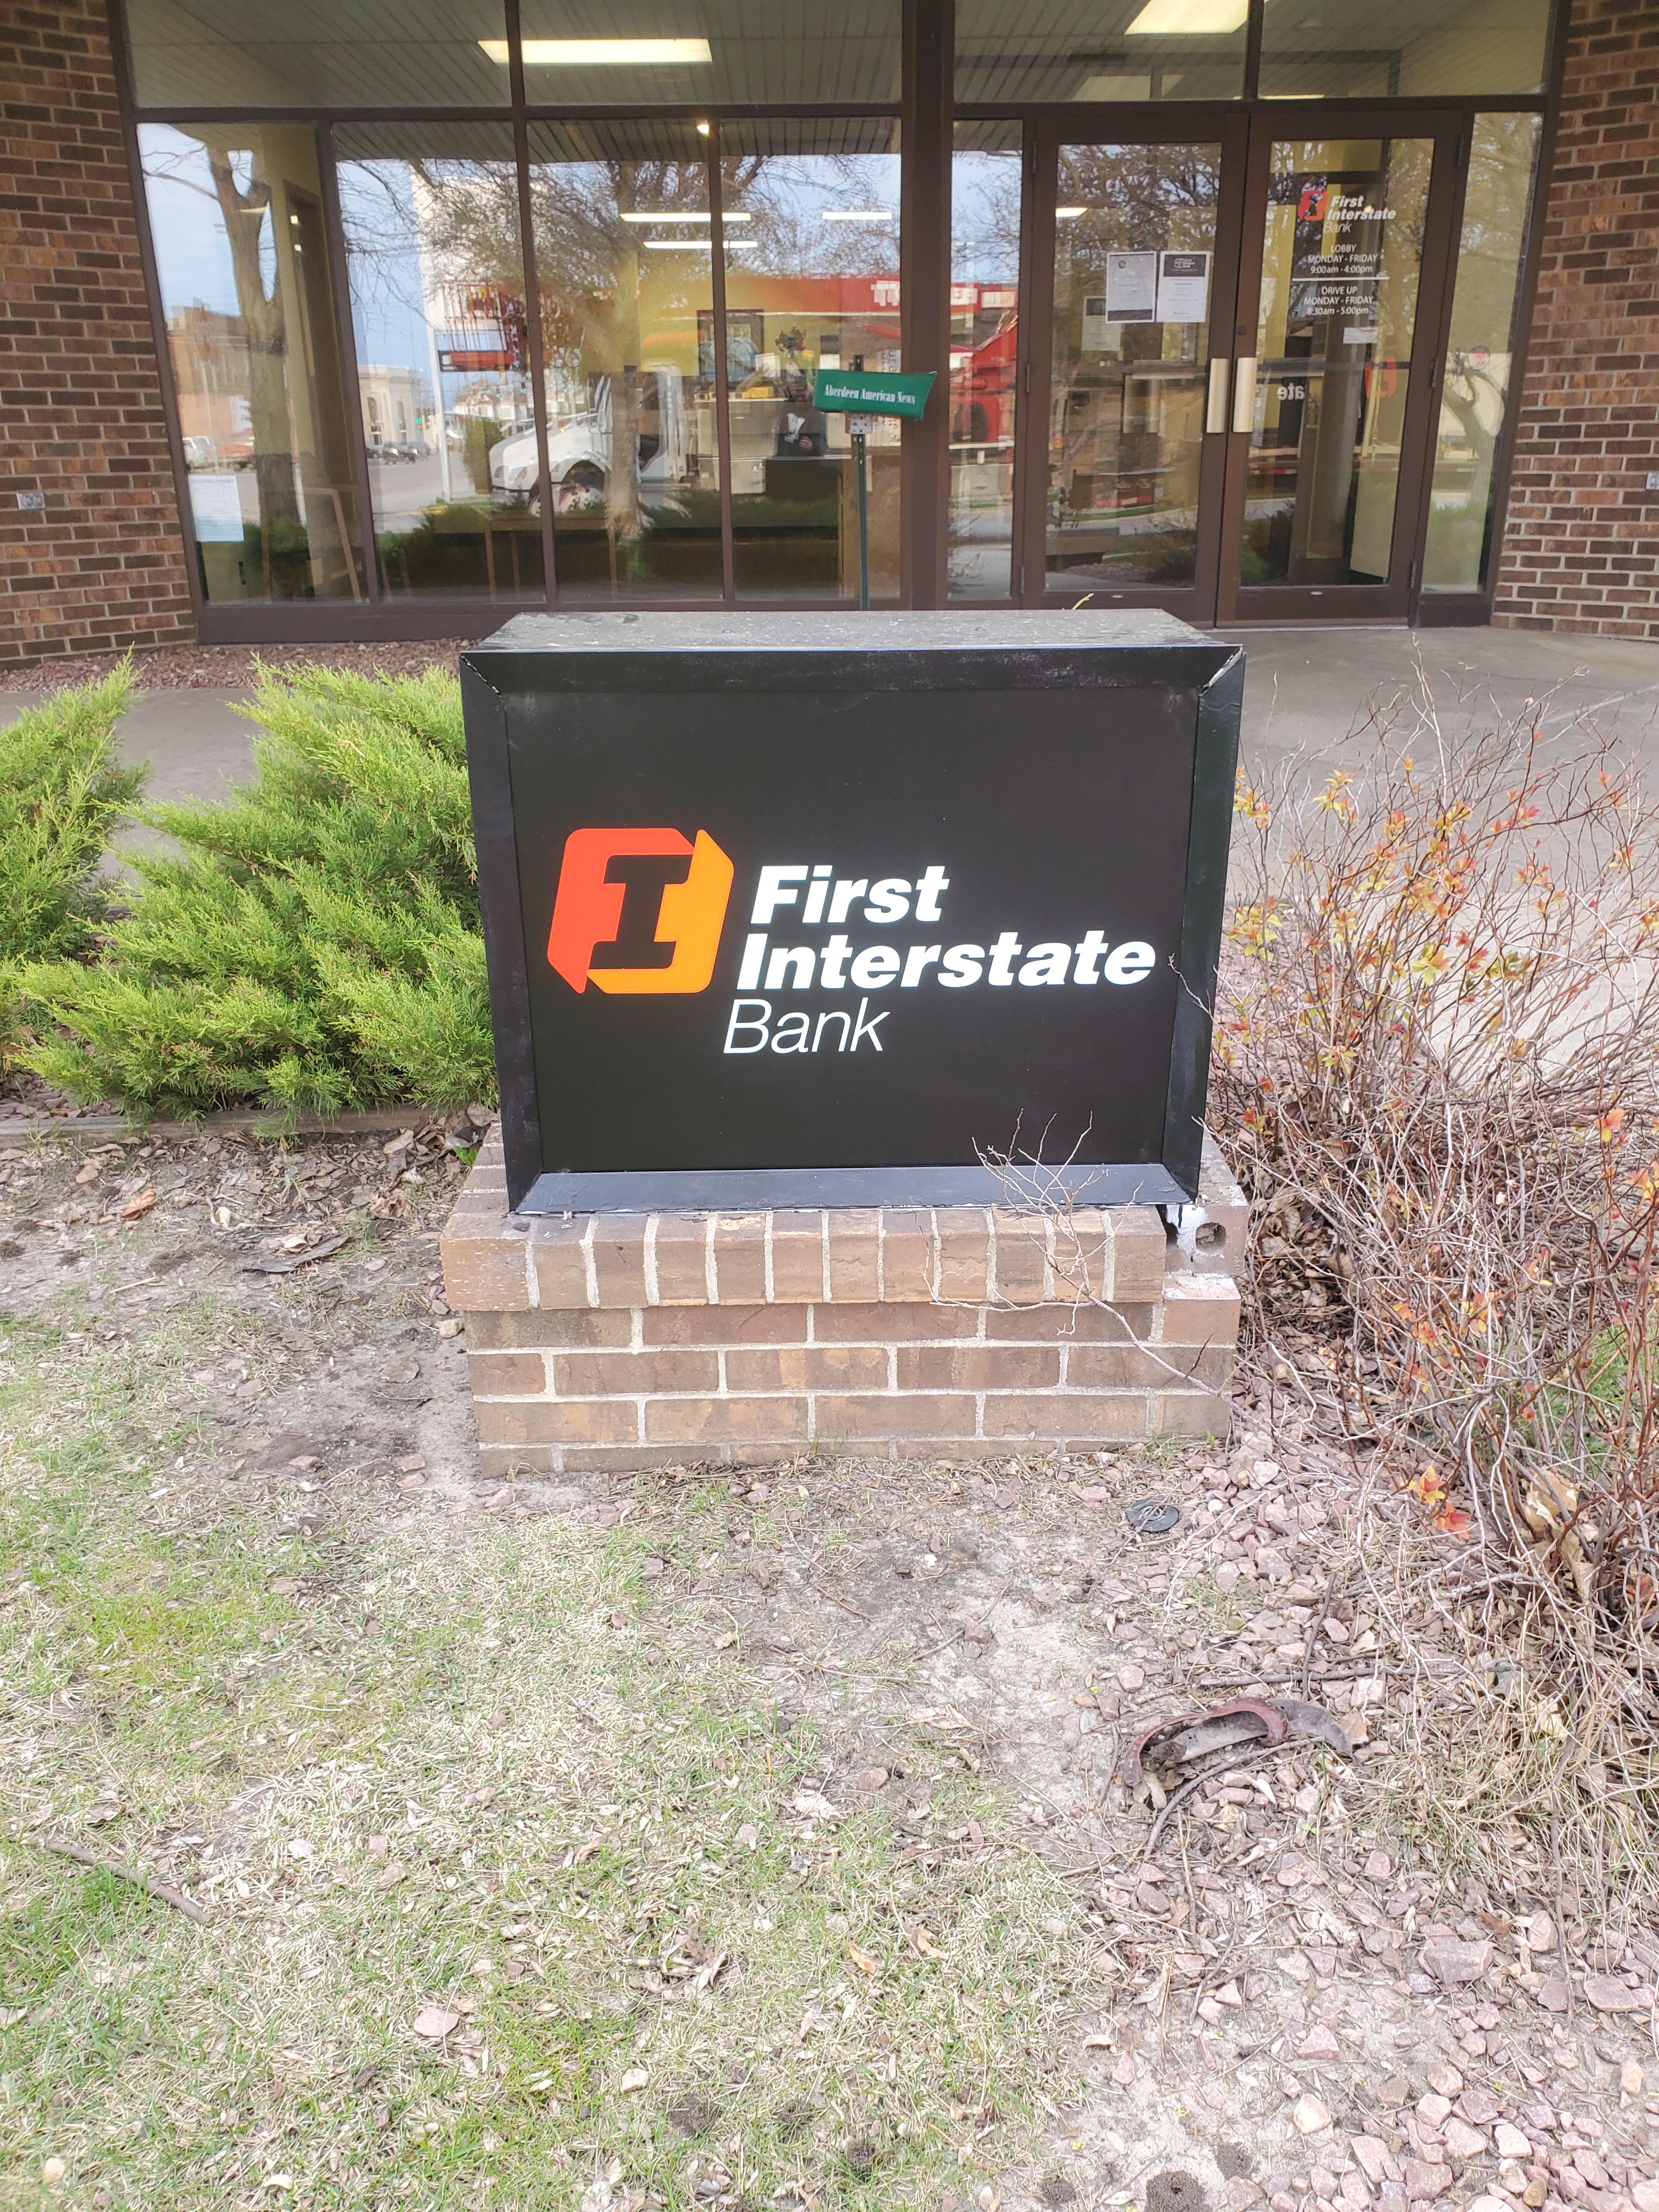 Exterior image of First Interstate Bank in Redfield, SD.